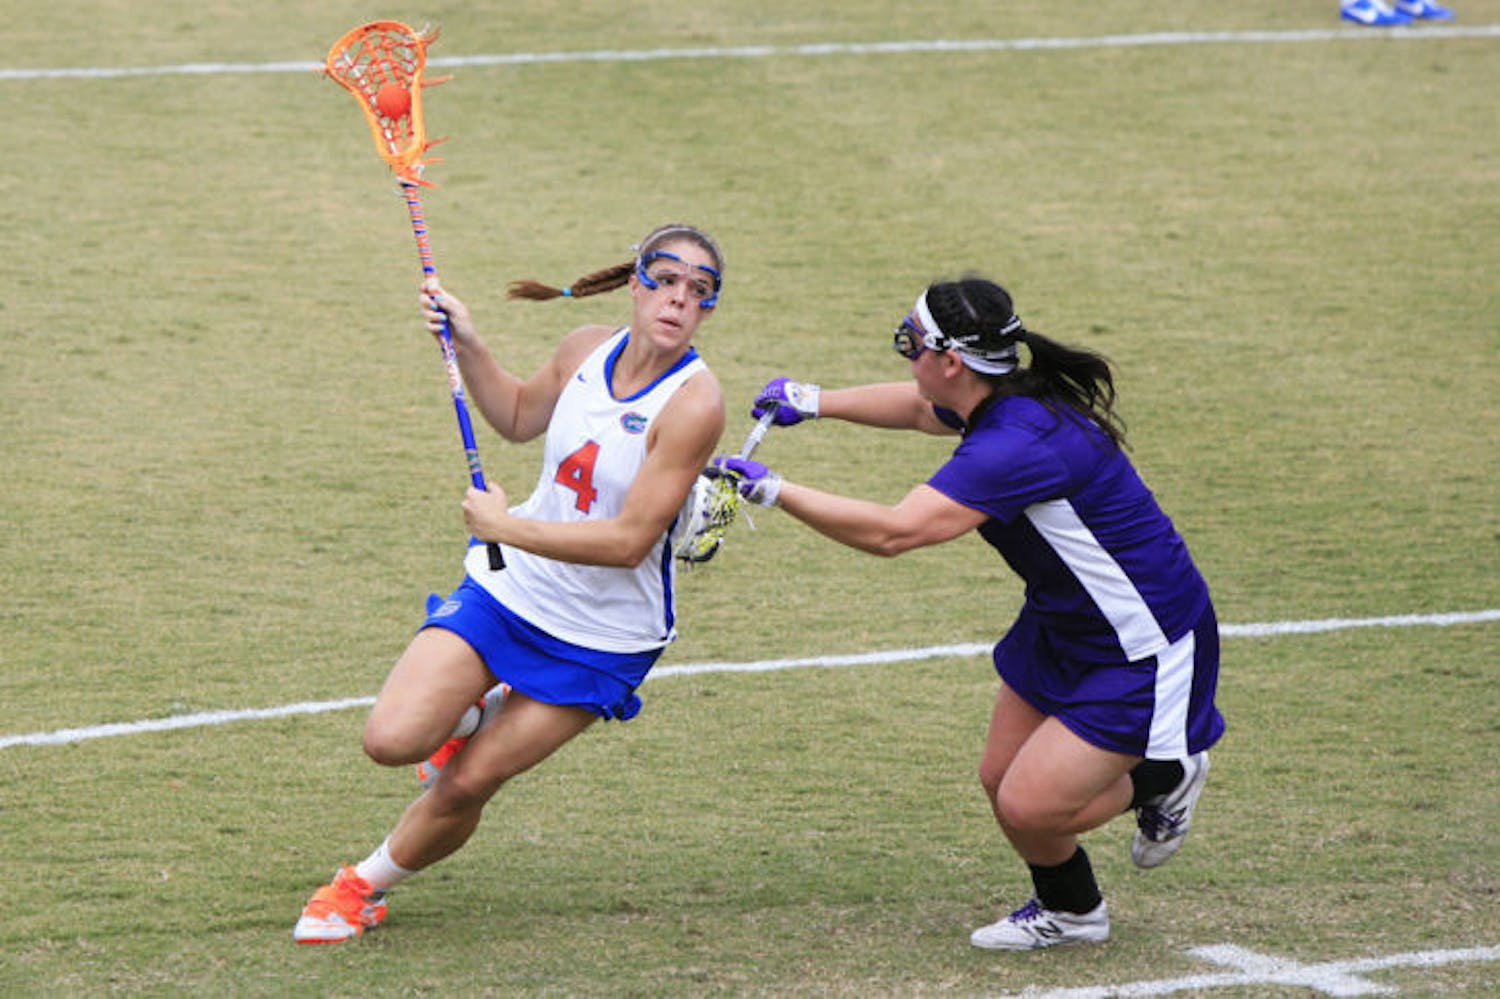 Senior attacker Kitty Cullen looks to score against UAlbany on Feb. 24 at Donald R. Dizney Stadium. Cullen scored two goals in her final game for the Gators.